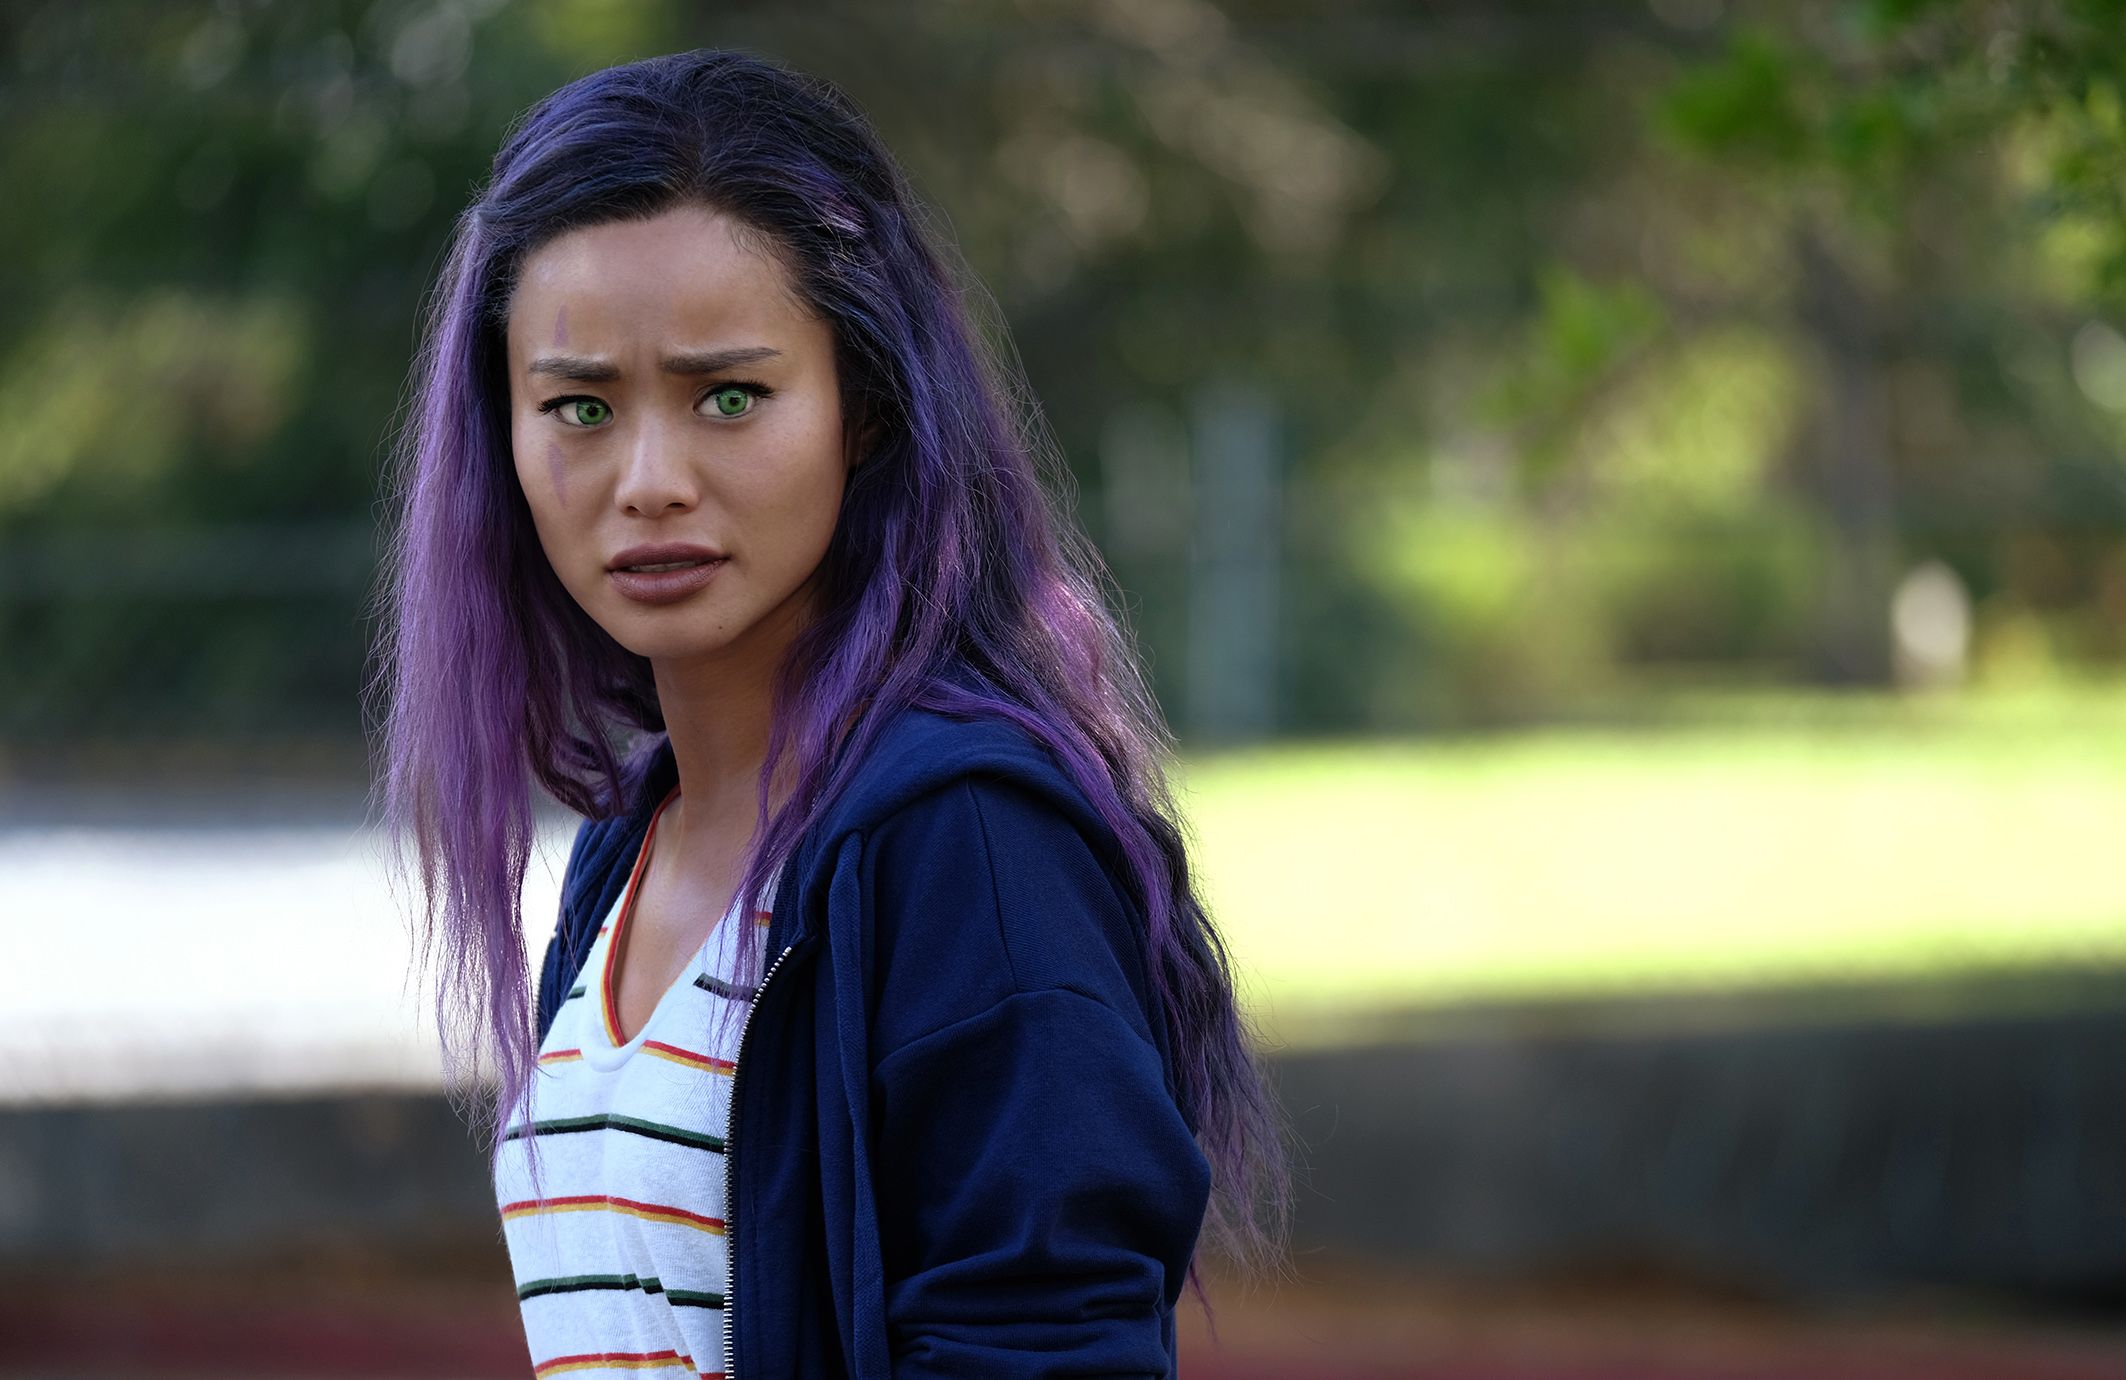 WACH Fox breaks down the fall premiere of The Gifted & Lethal Weapon